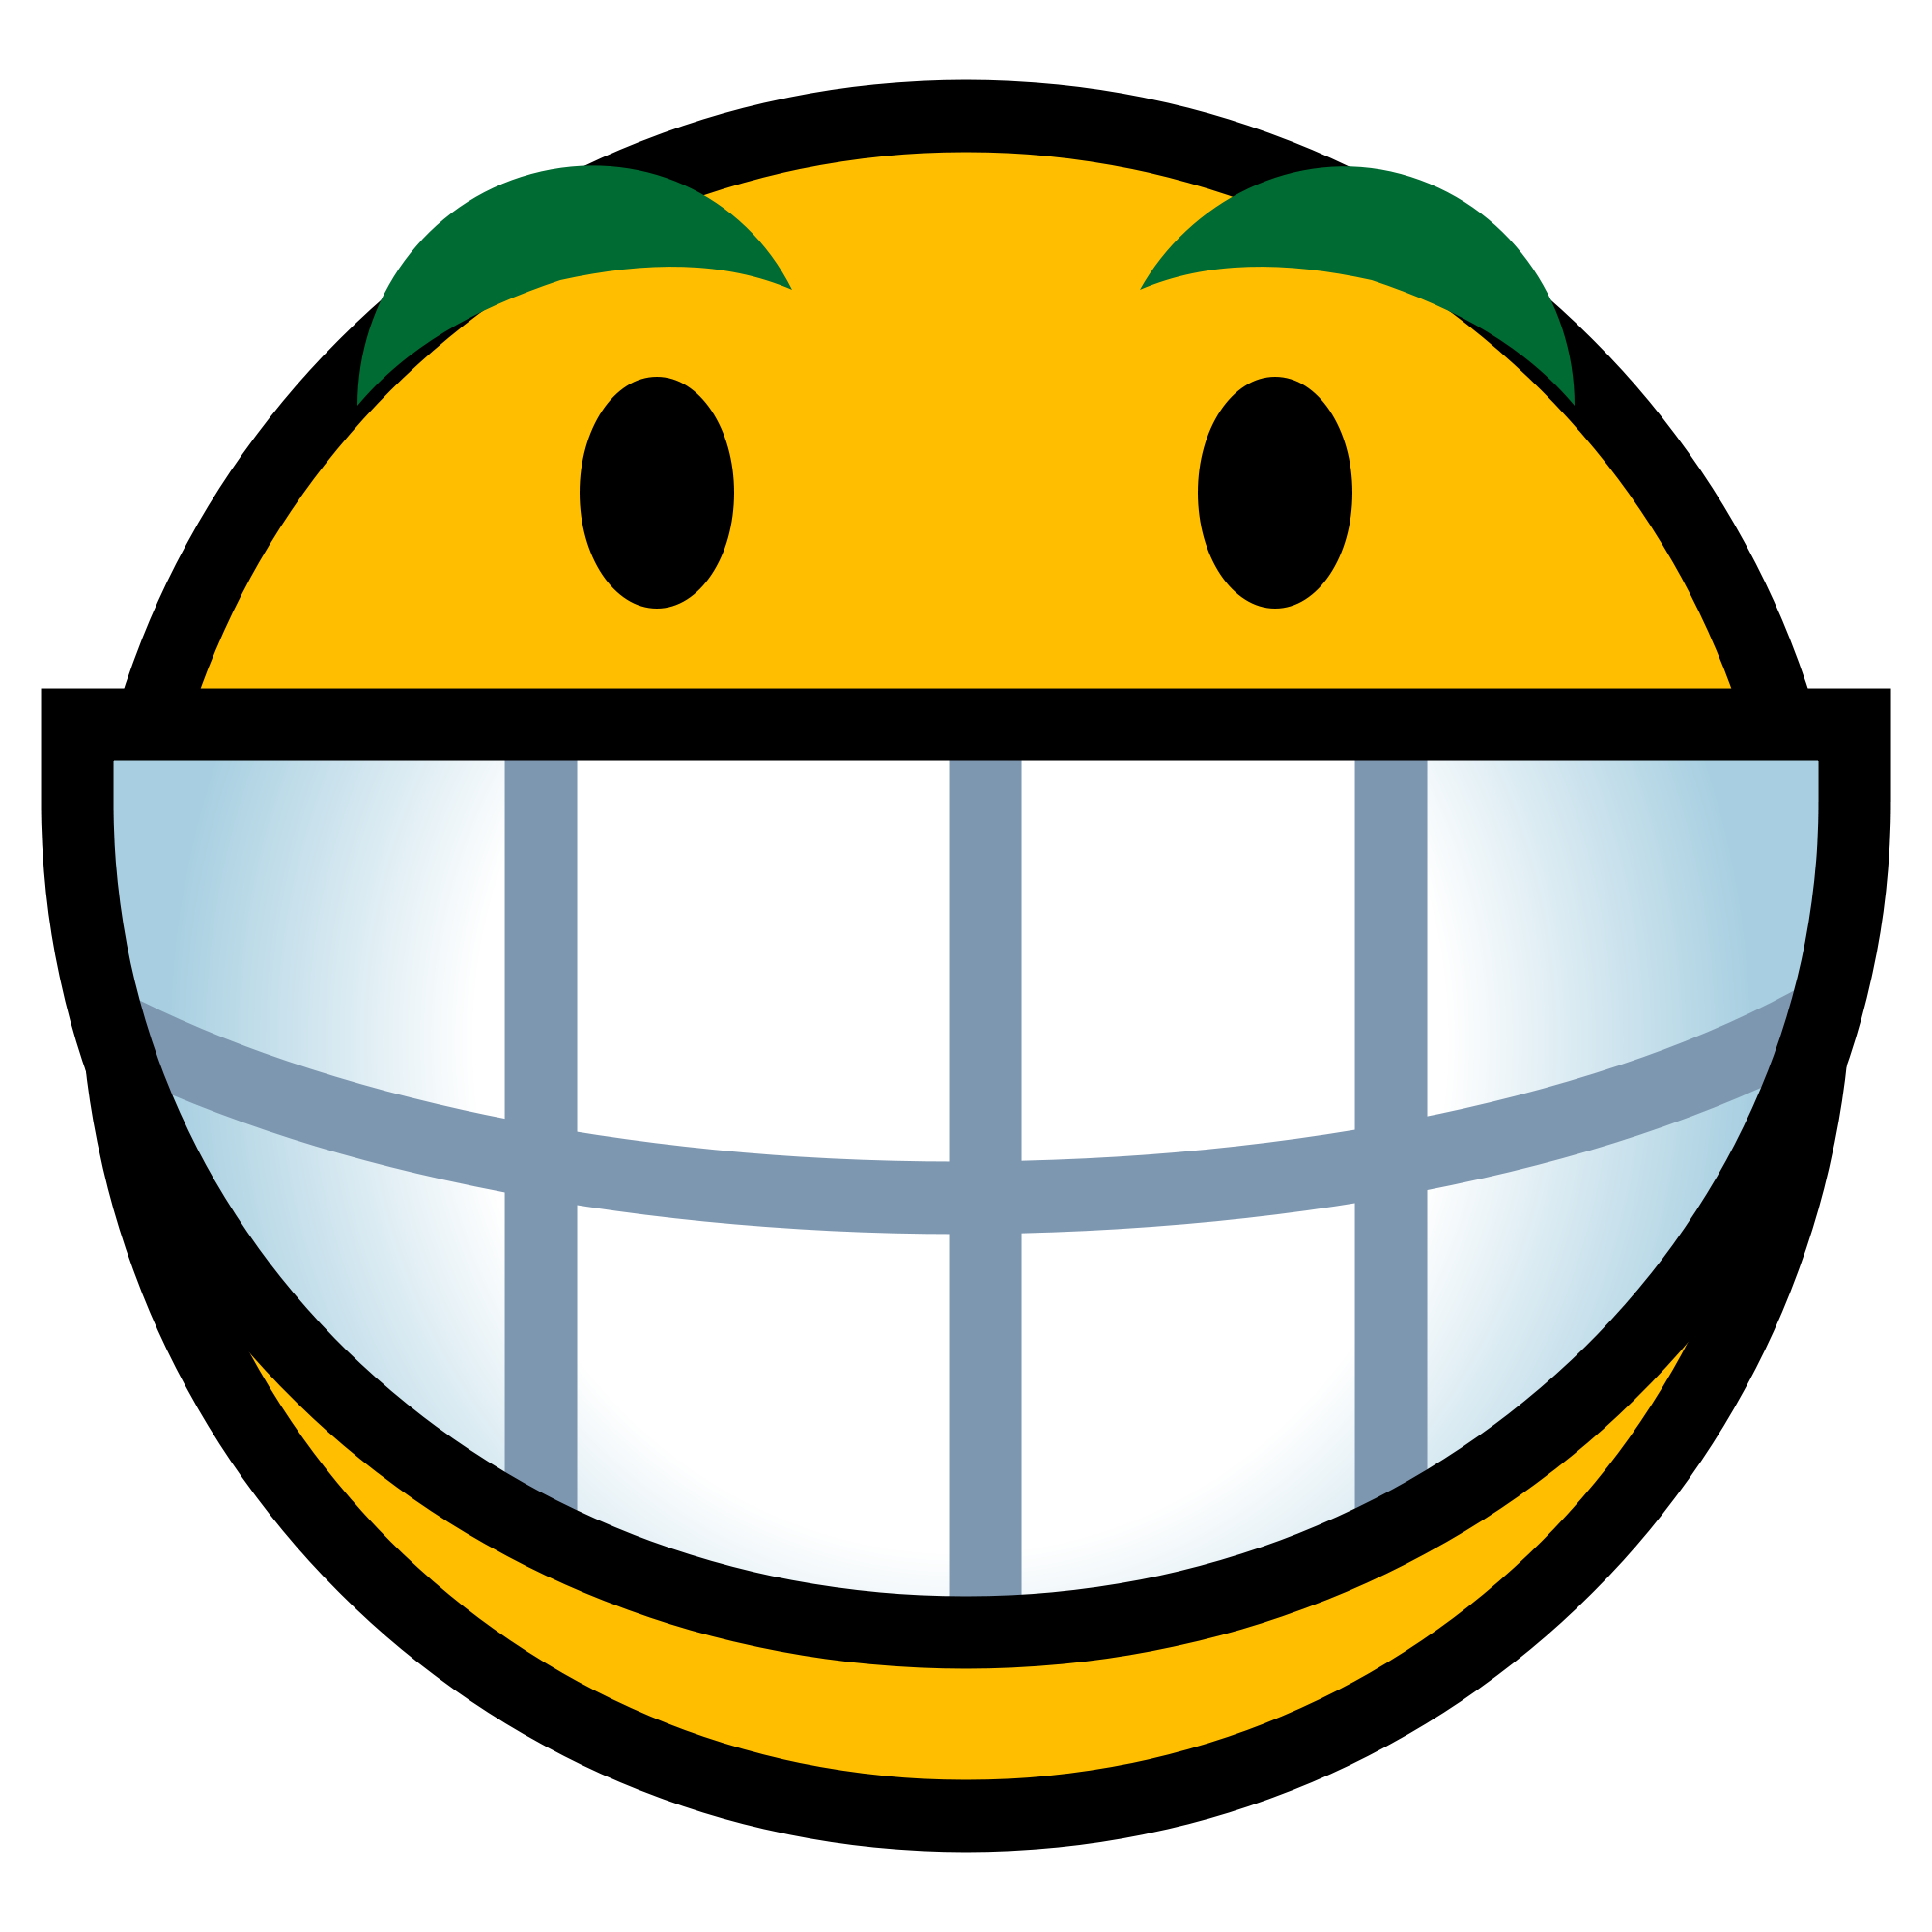 File:Biggrin-smiley.png - Wikimedia Commons